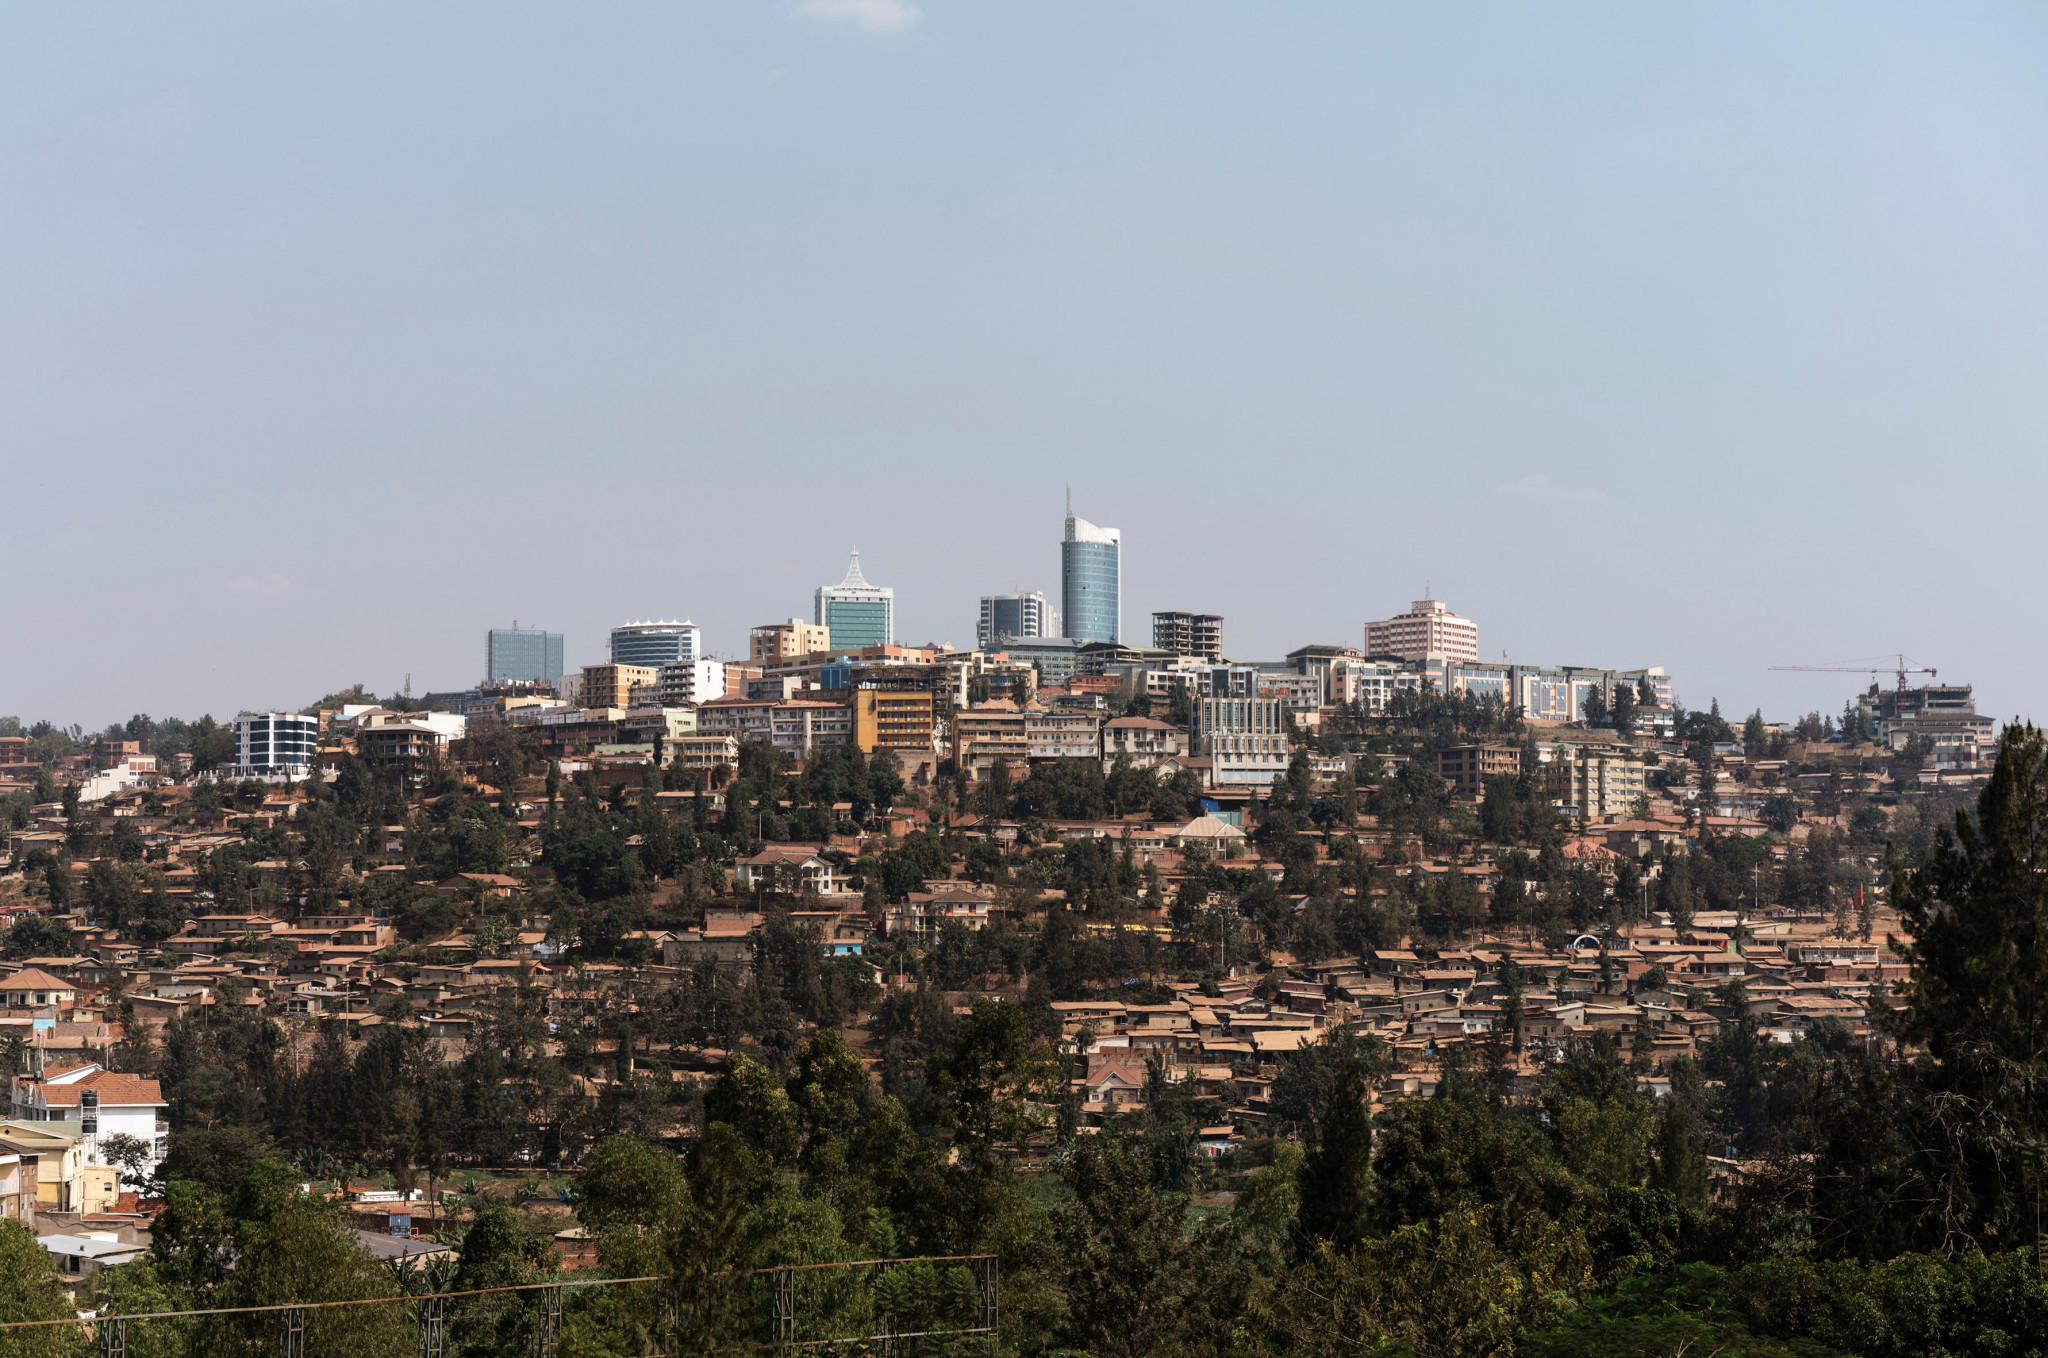 Kigali in Rwanda will host the 2019 CGF General Assembly ©Getty Images